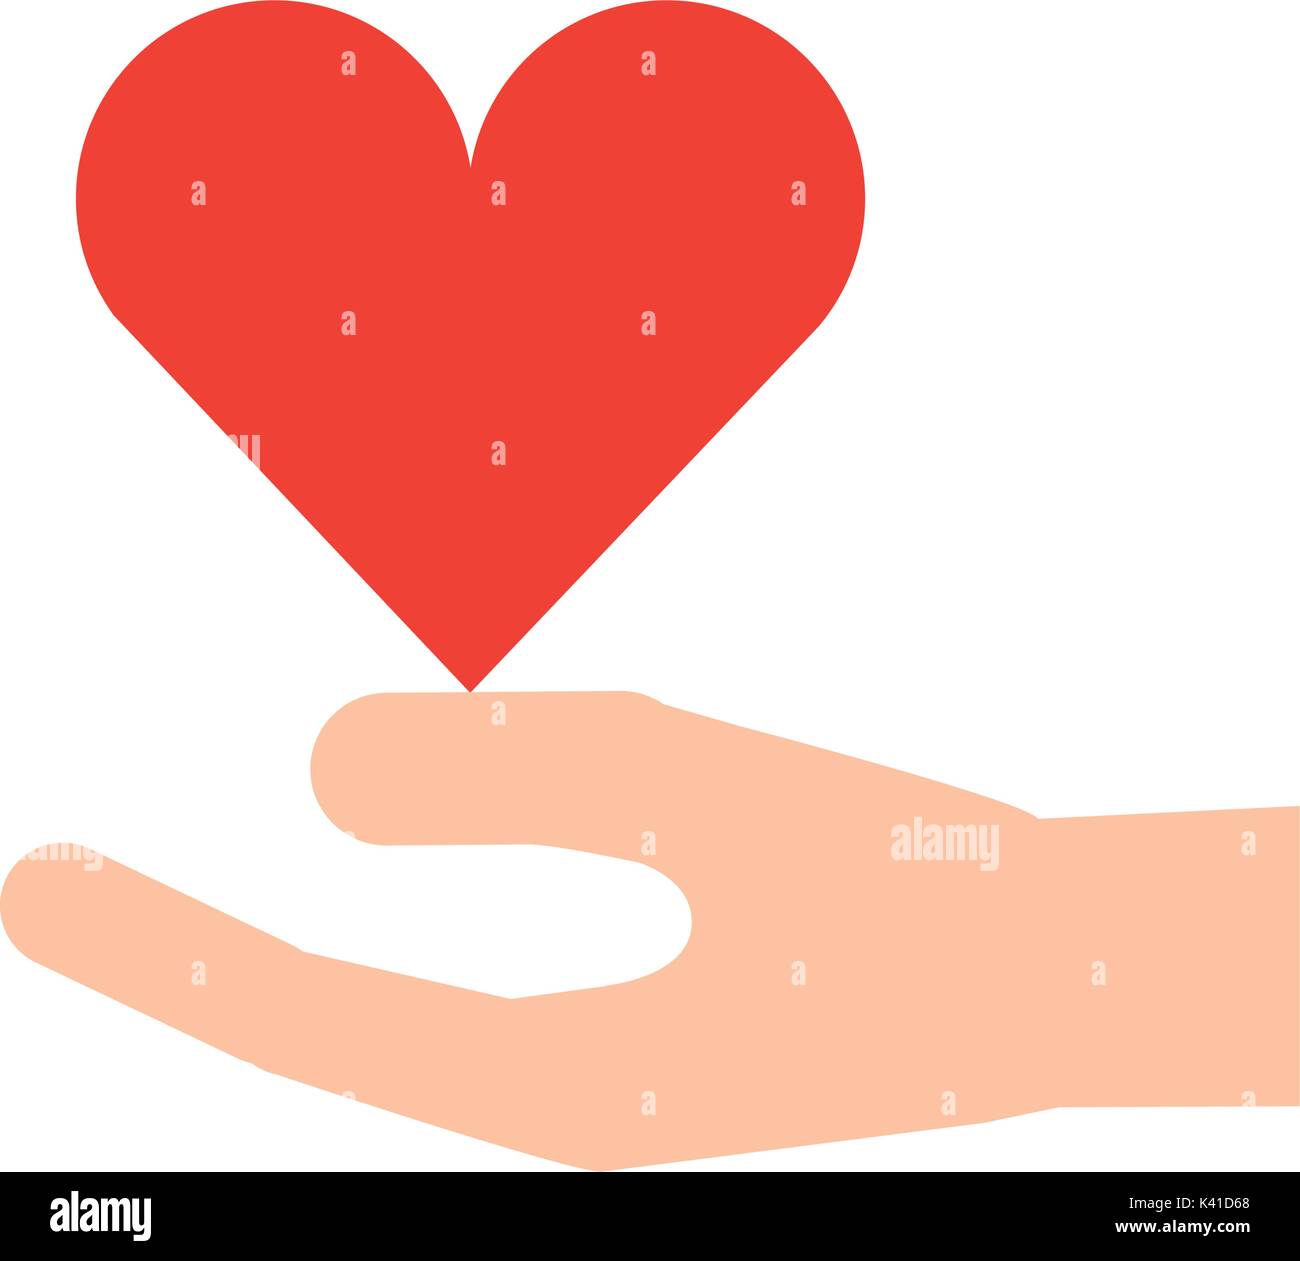 hand holding heart health care wellness concept Stock Vector Image ...